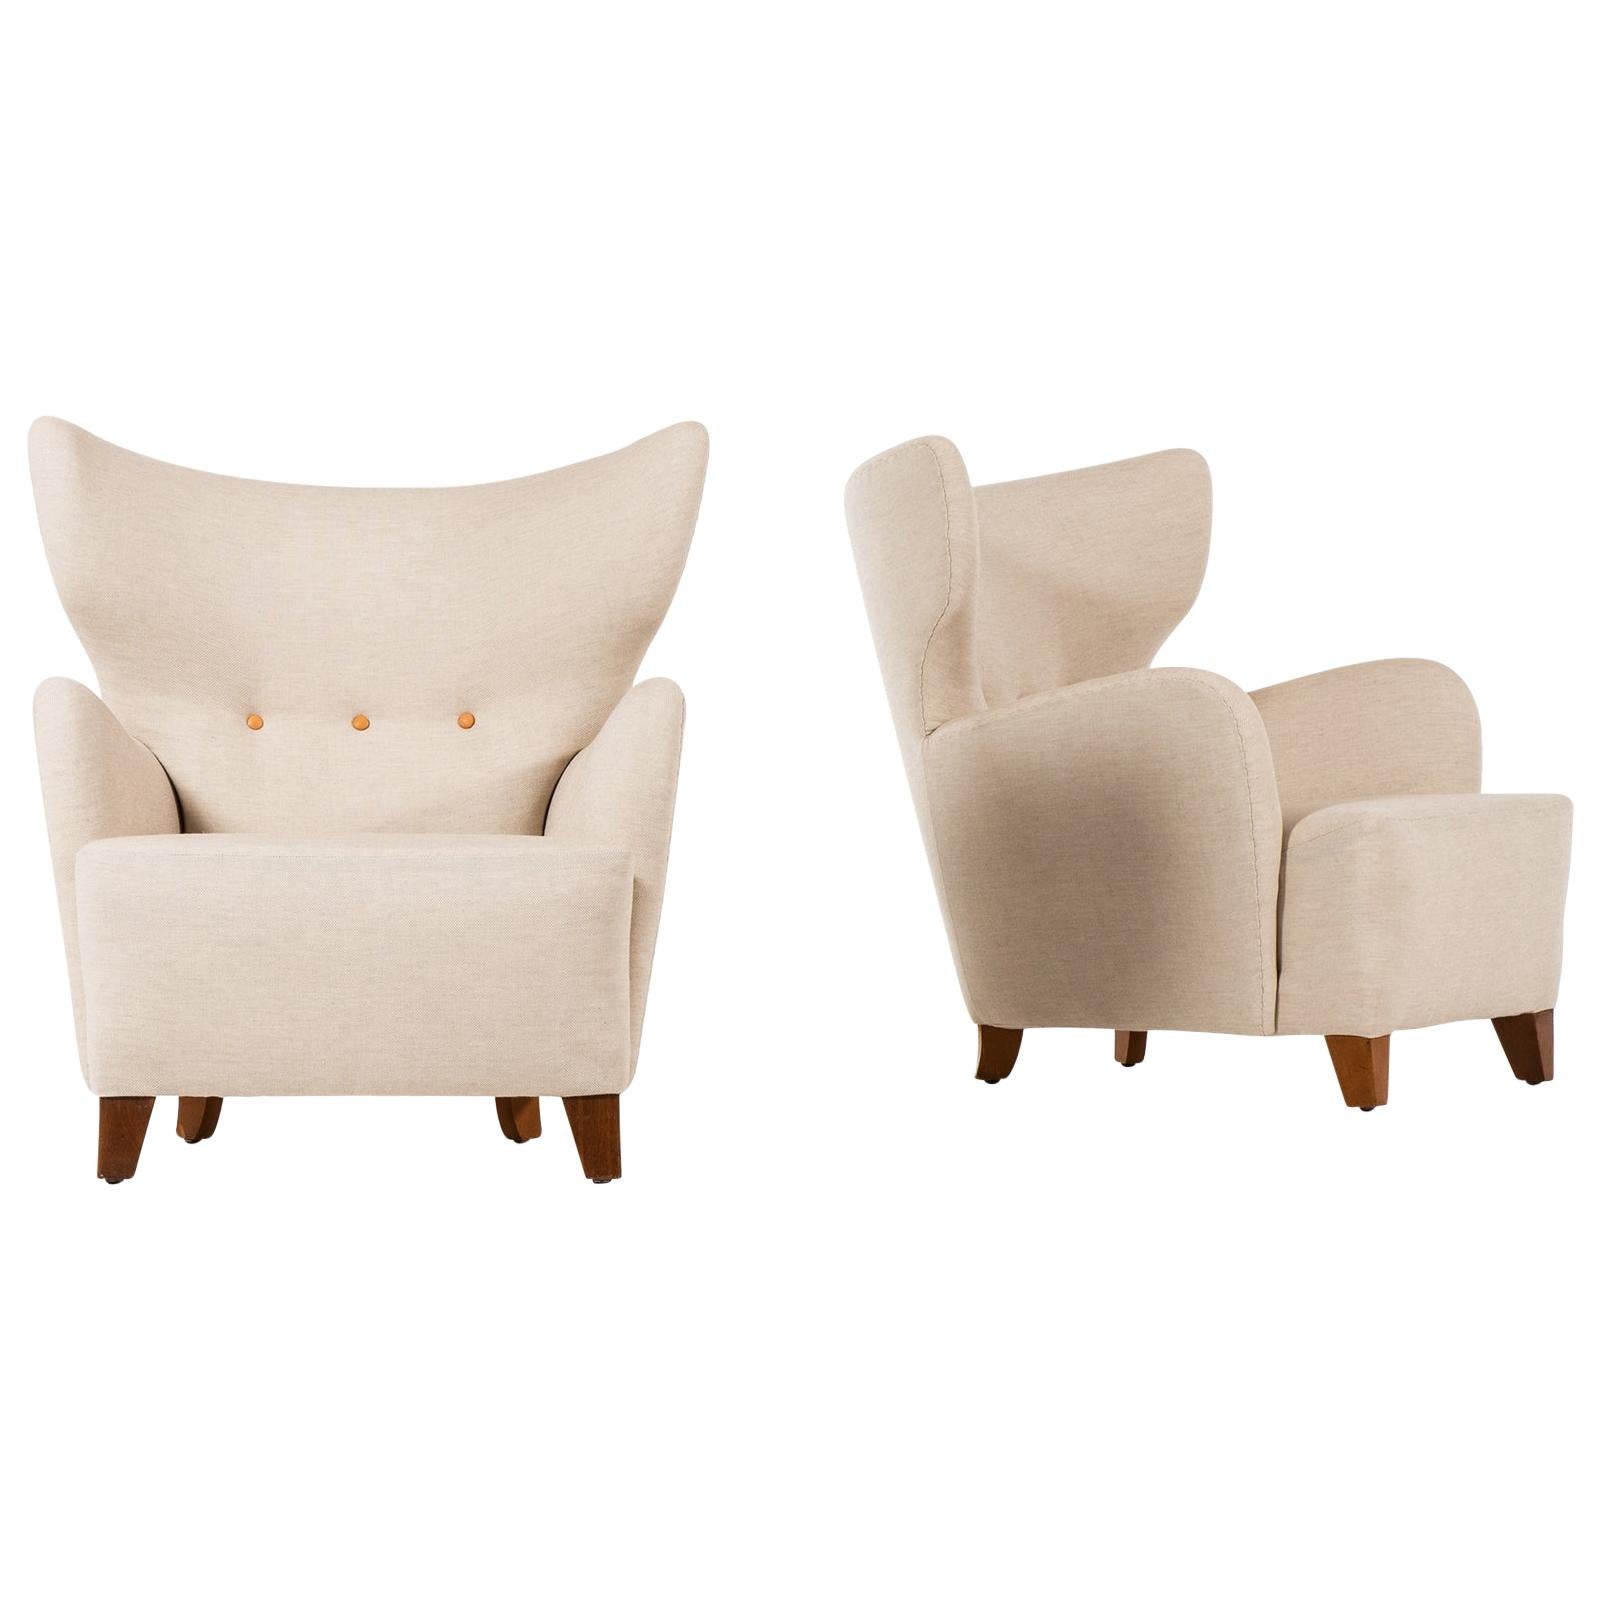 Flemming Lassen Attributed Pair of Wingback Easy Chairs Produced in Denmark